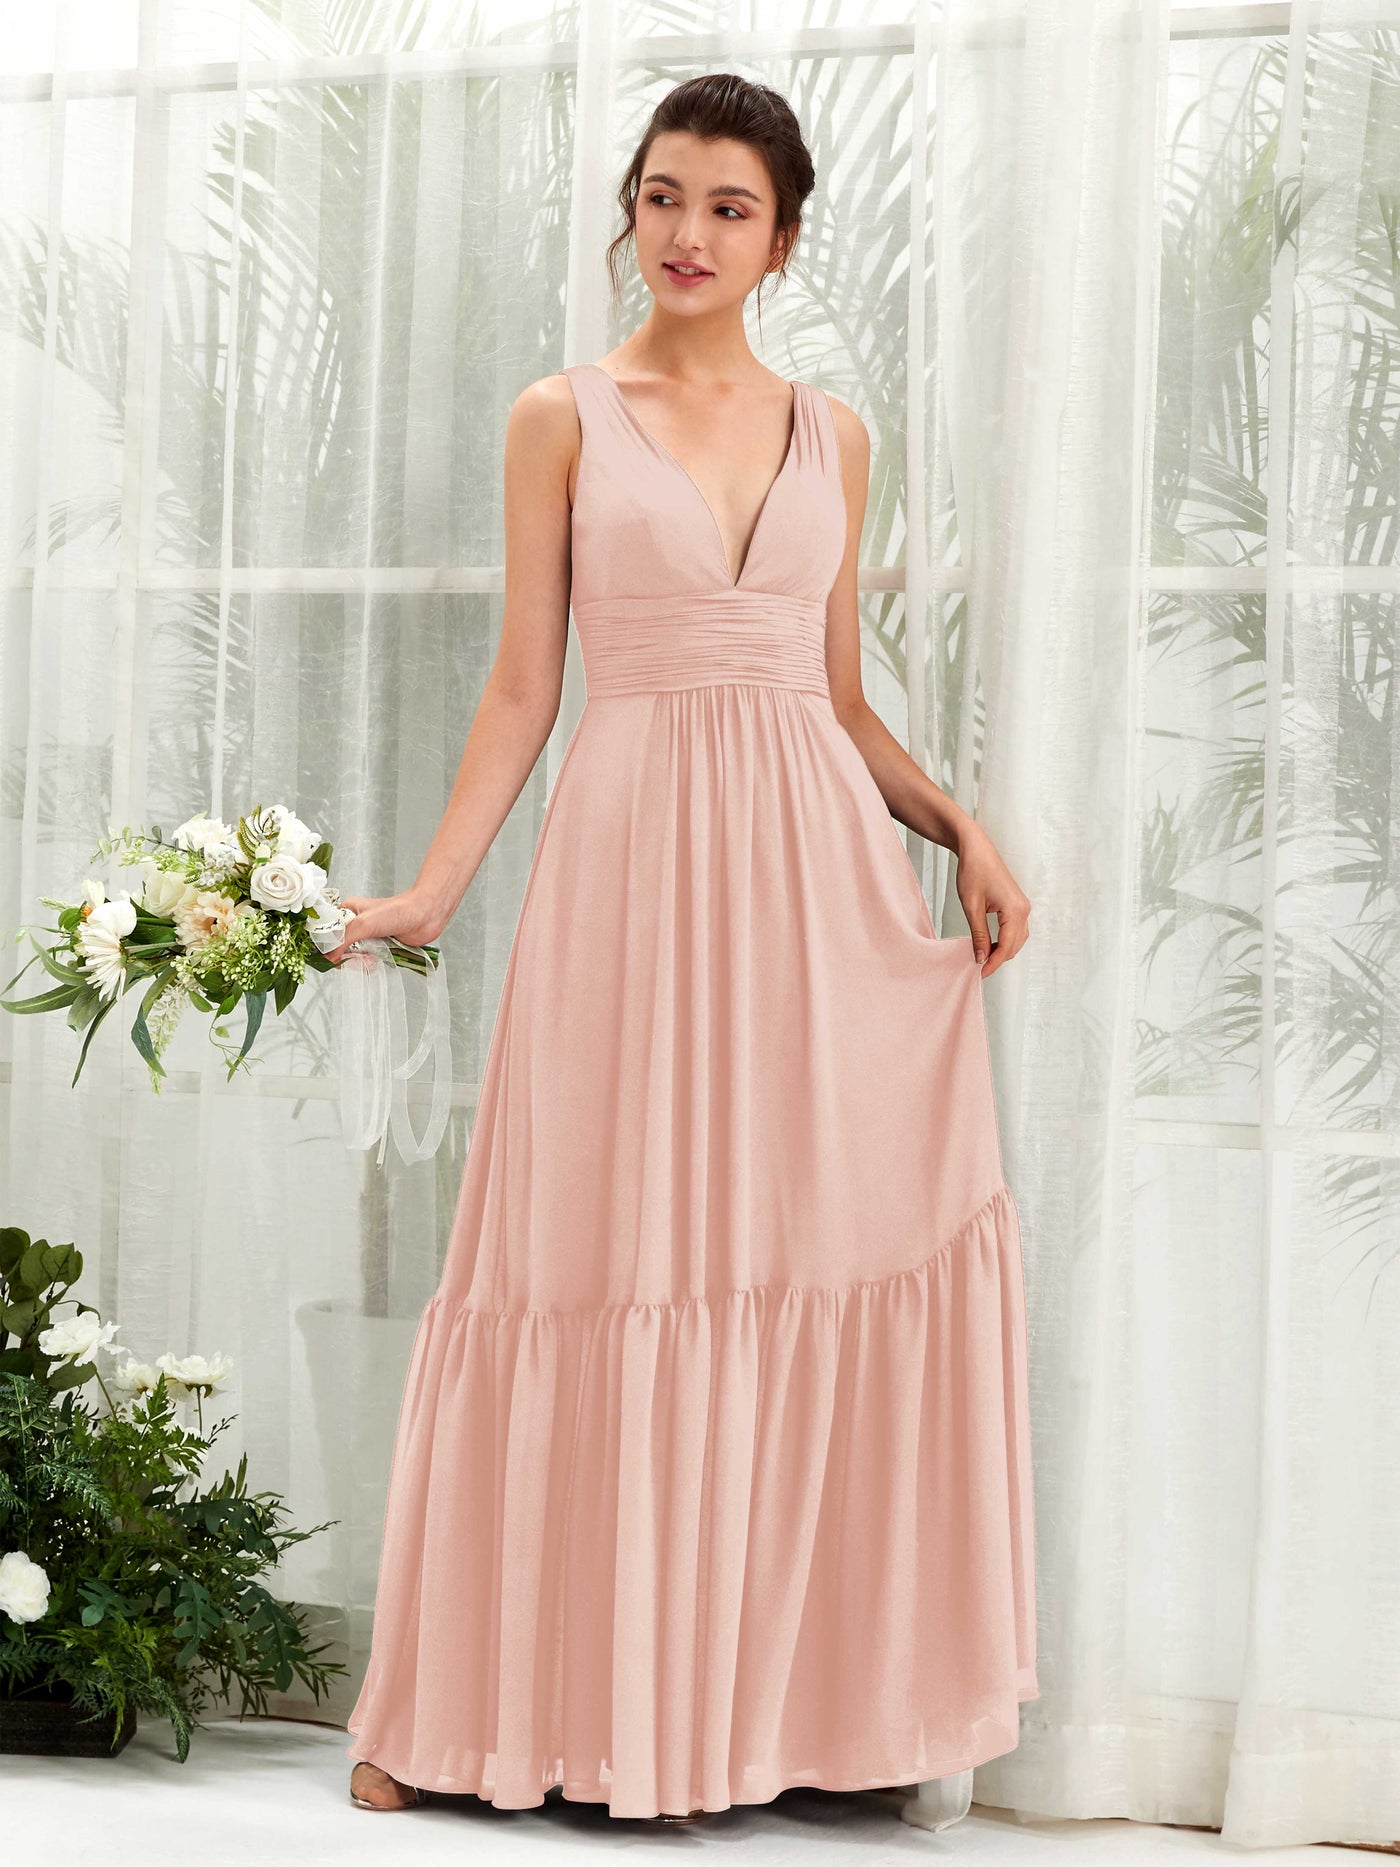 Pearl Pink Bridesmaid Dresses Bridesmaid Dress A-line Chiffon Straps Full Length Sleeveless Wedding Party Dress (80223708)#color_pearl-pink